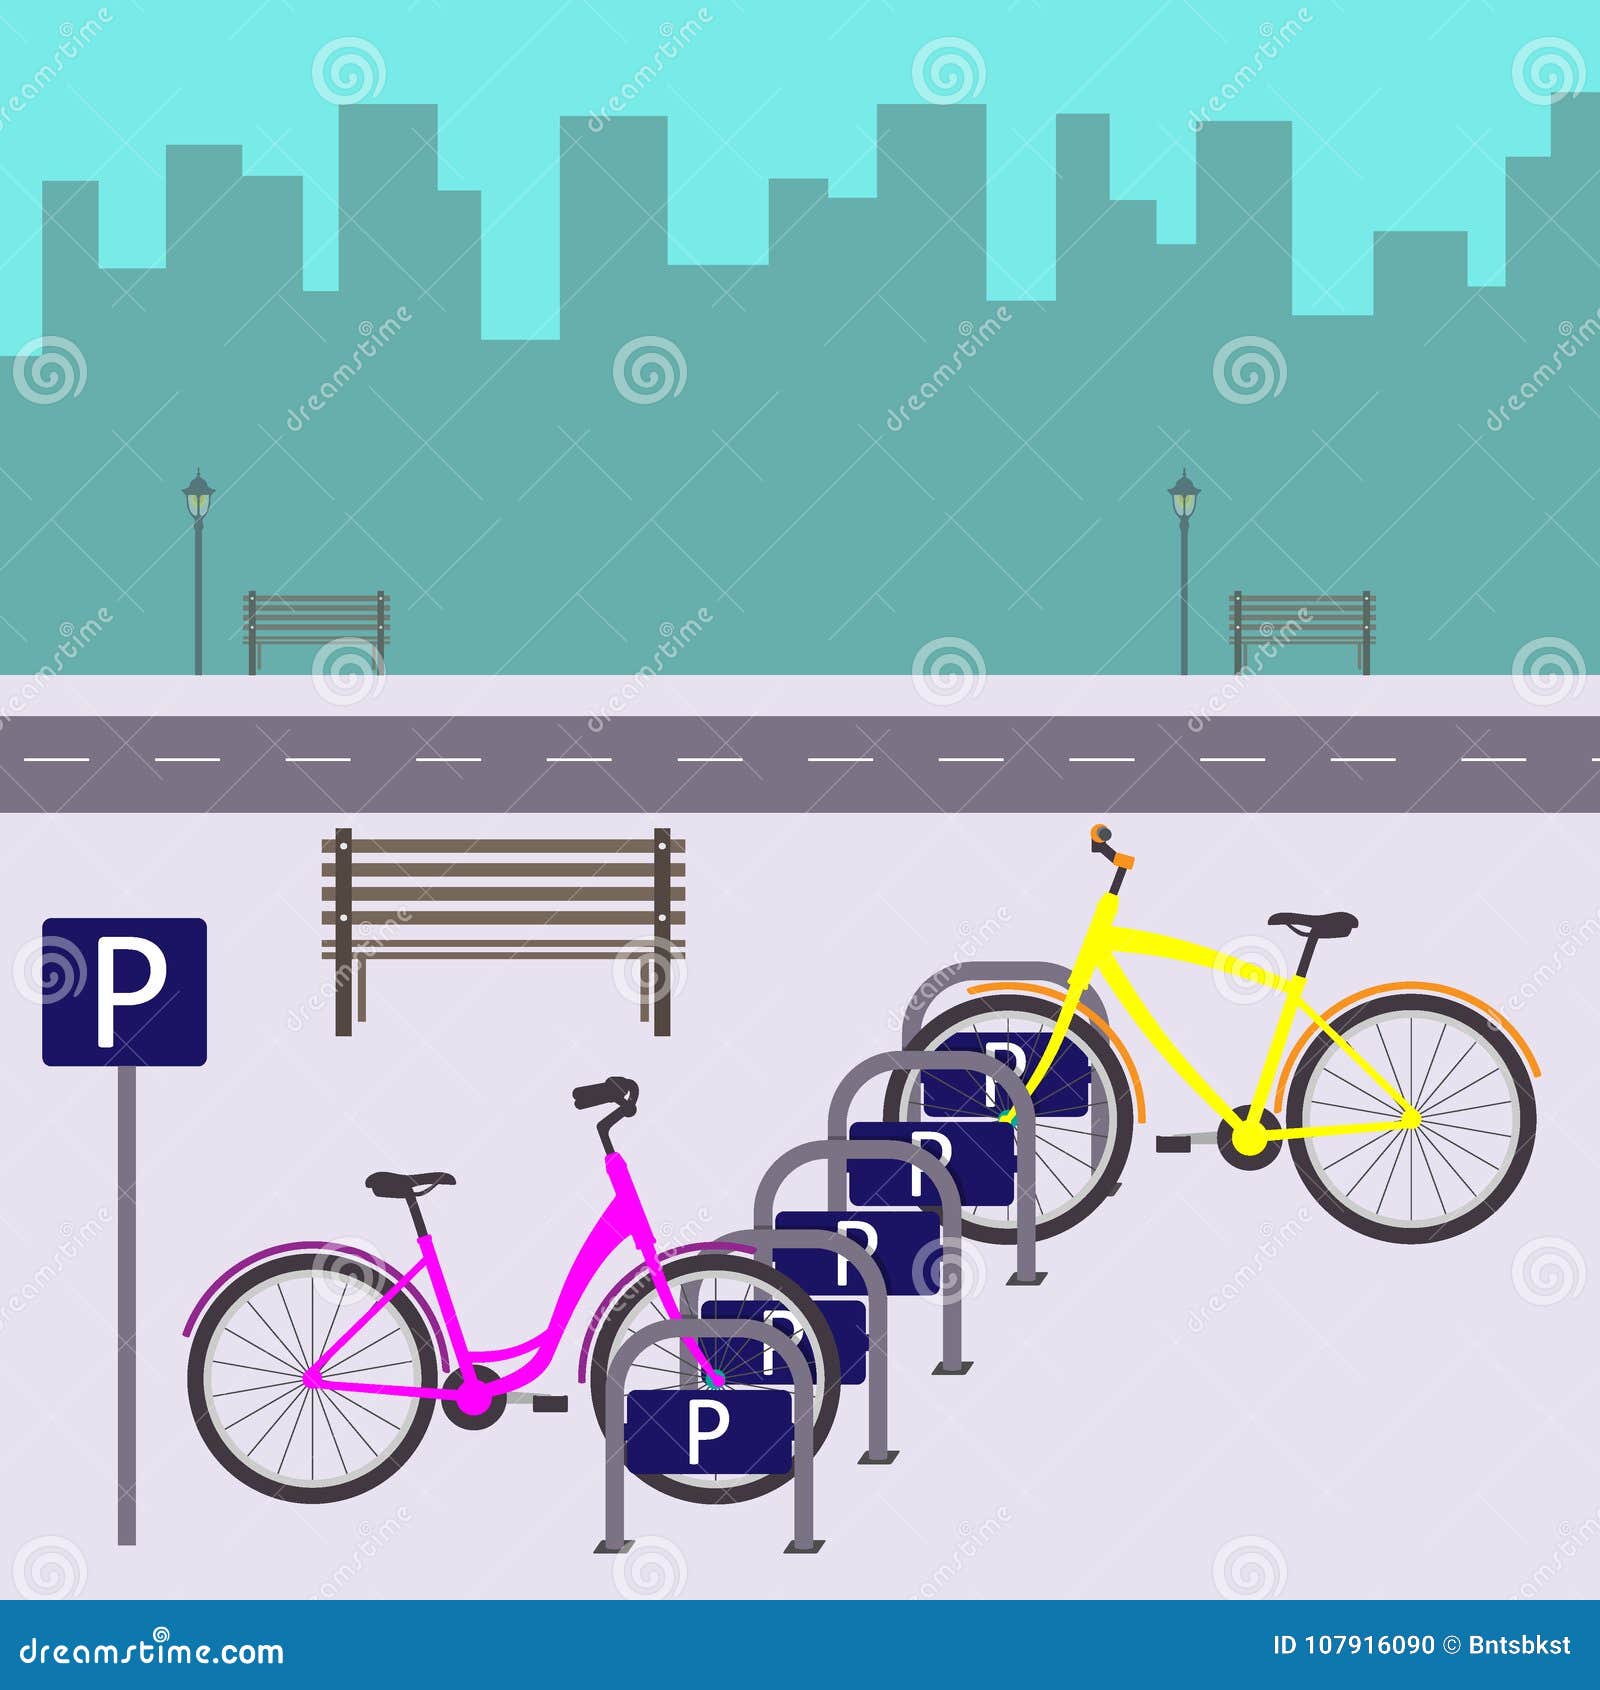 Bicycle Parking on a City Street. Two Bicycles at Parking. Vector ...